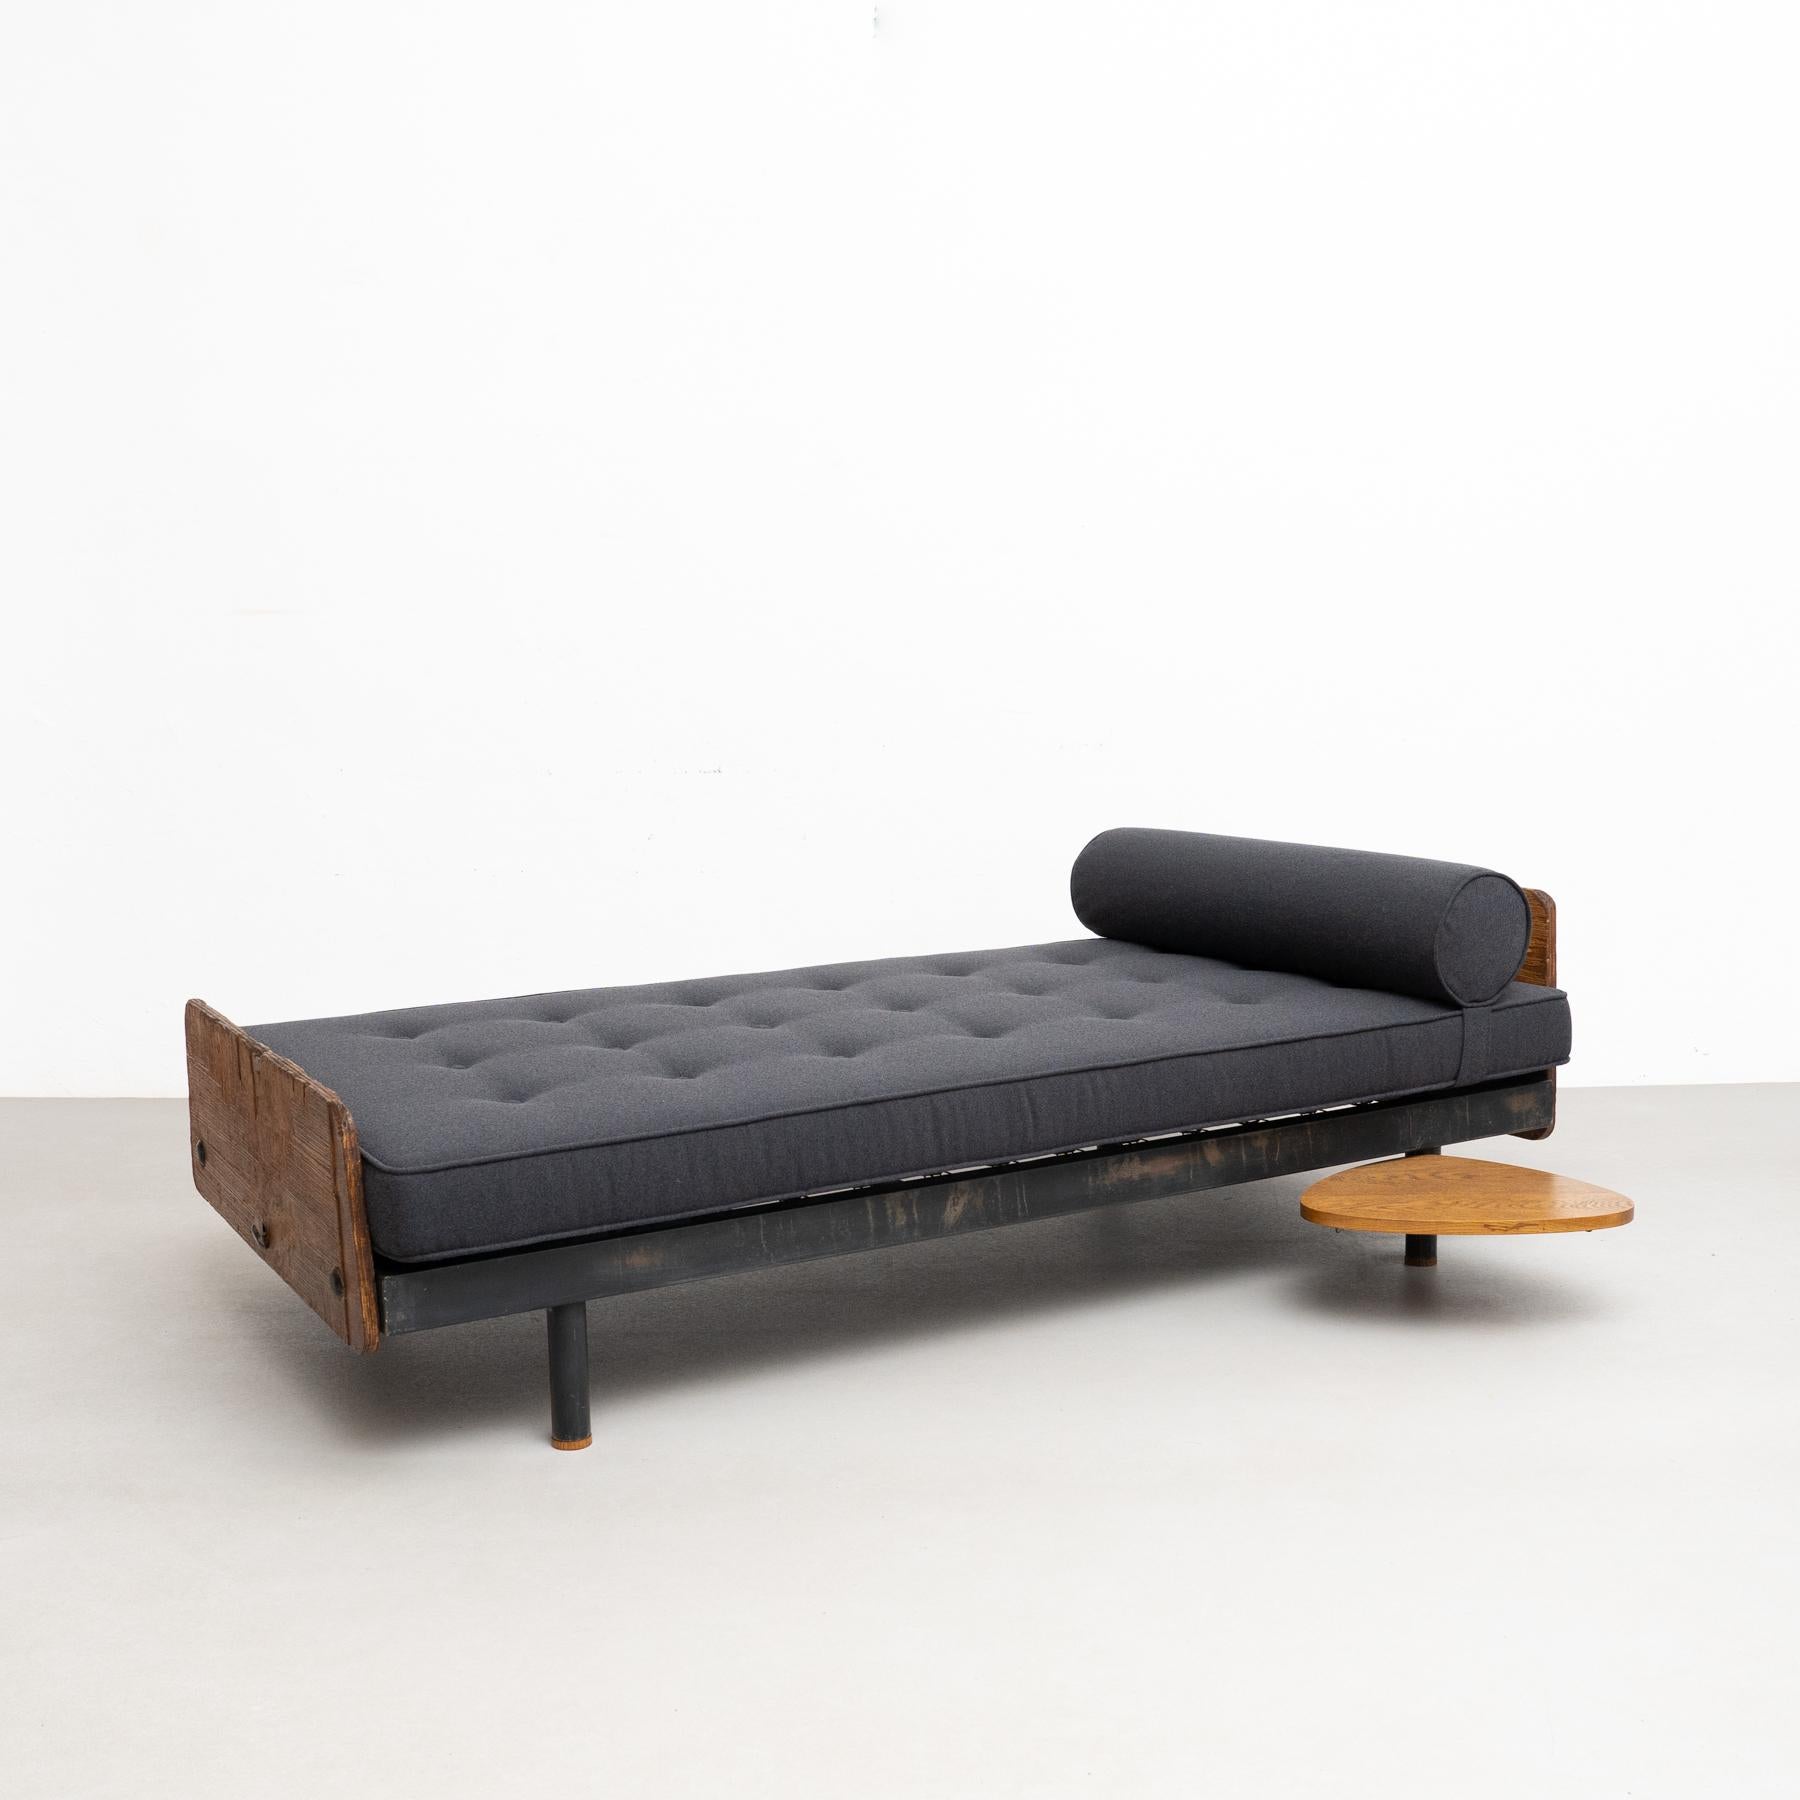 S.C.A.L. daybed designed by Jean Prouvé.

Manufactured by Ateliers Prouve, France, circa 1950.

Original preserved wooden boards.

This bed has been restored.

Metal frame, new upholstery, repainted.

Table has been done new according to